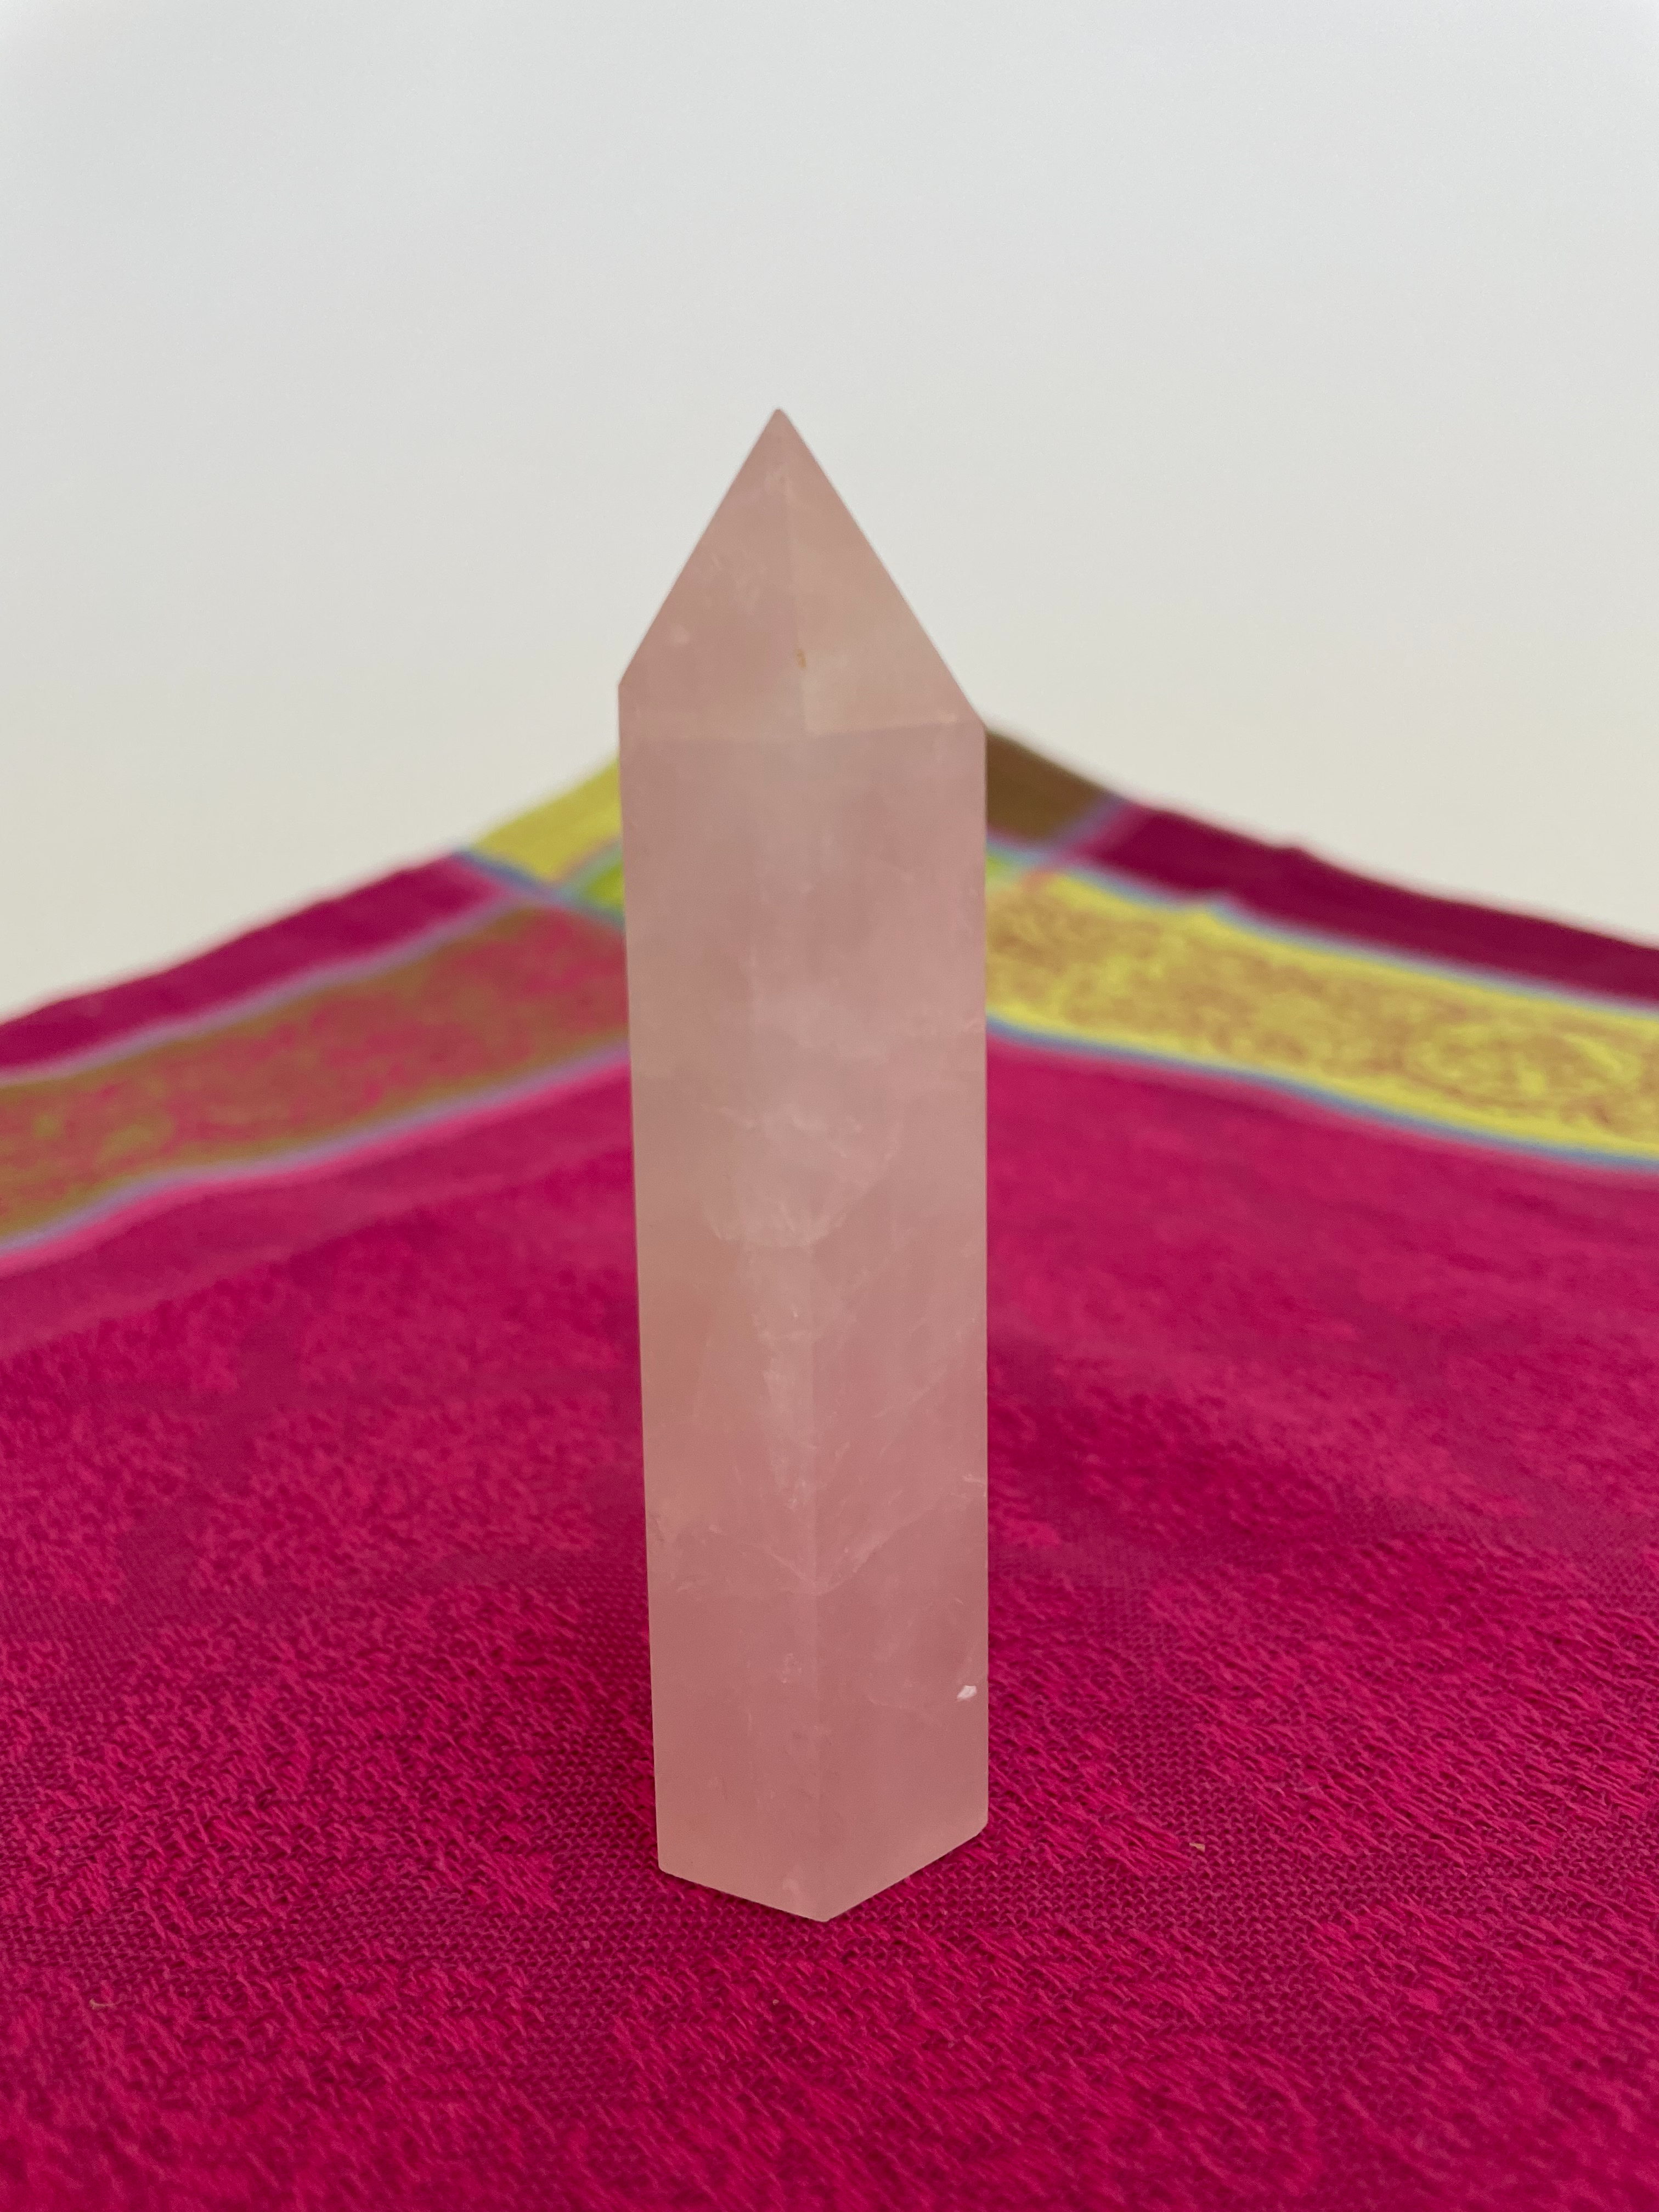 Alternate view. Rose Quartz tower of love 💗. Beautiful rose quartz tower for your altar, for healing or as décor for any room in your home or office. Rose quartz is the ultimate love stone, for love of all types - to attract love and for self-love. It is soothing, enhances compassion, is the best emotional healer, dispels negative energy, opens your heart and so much more. Approx. 3¾" long. See photos below for views of all sides. Cost is $18.00.